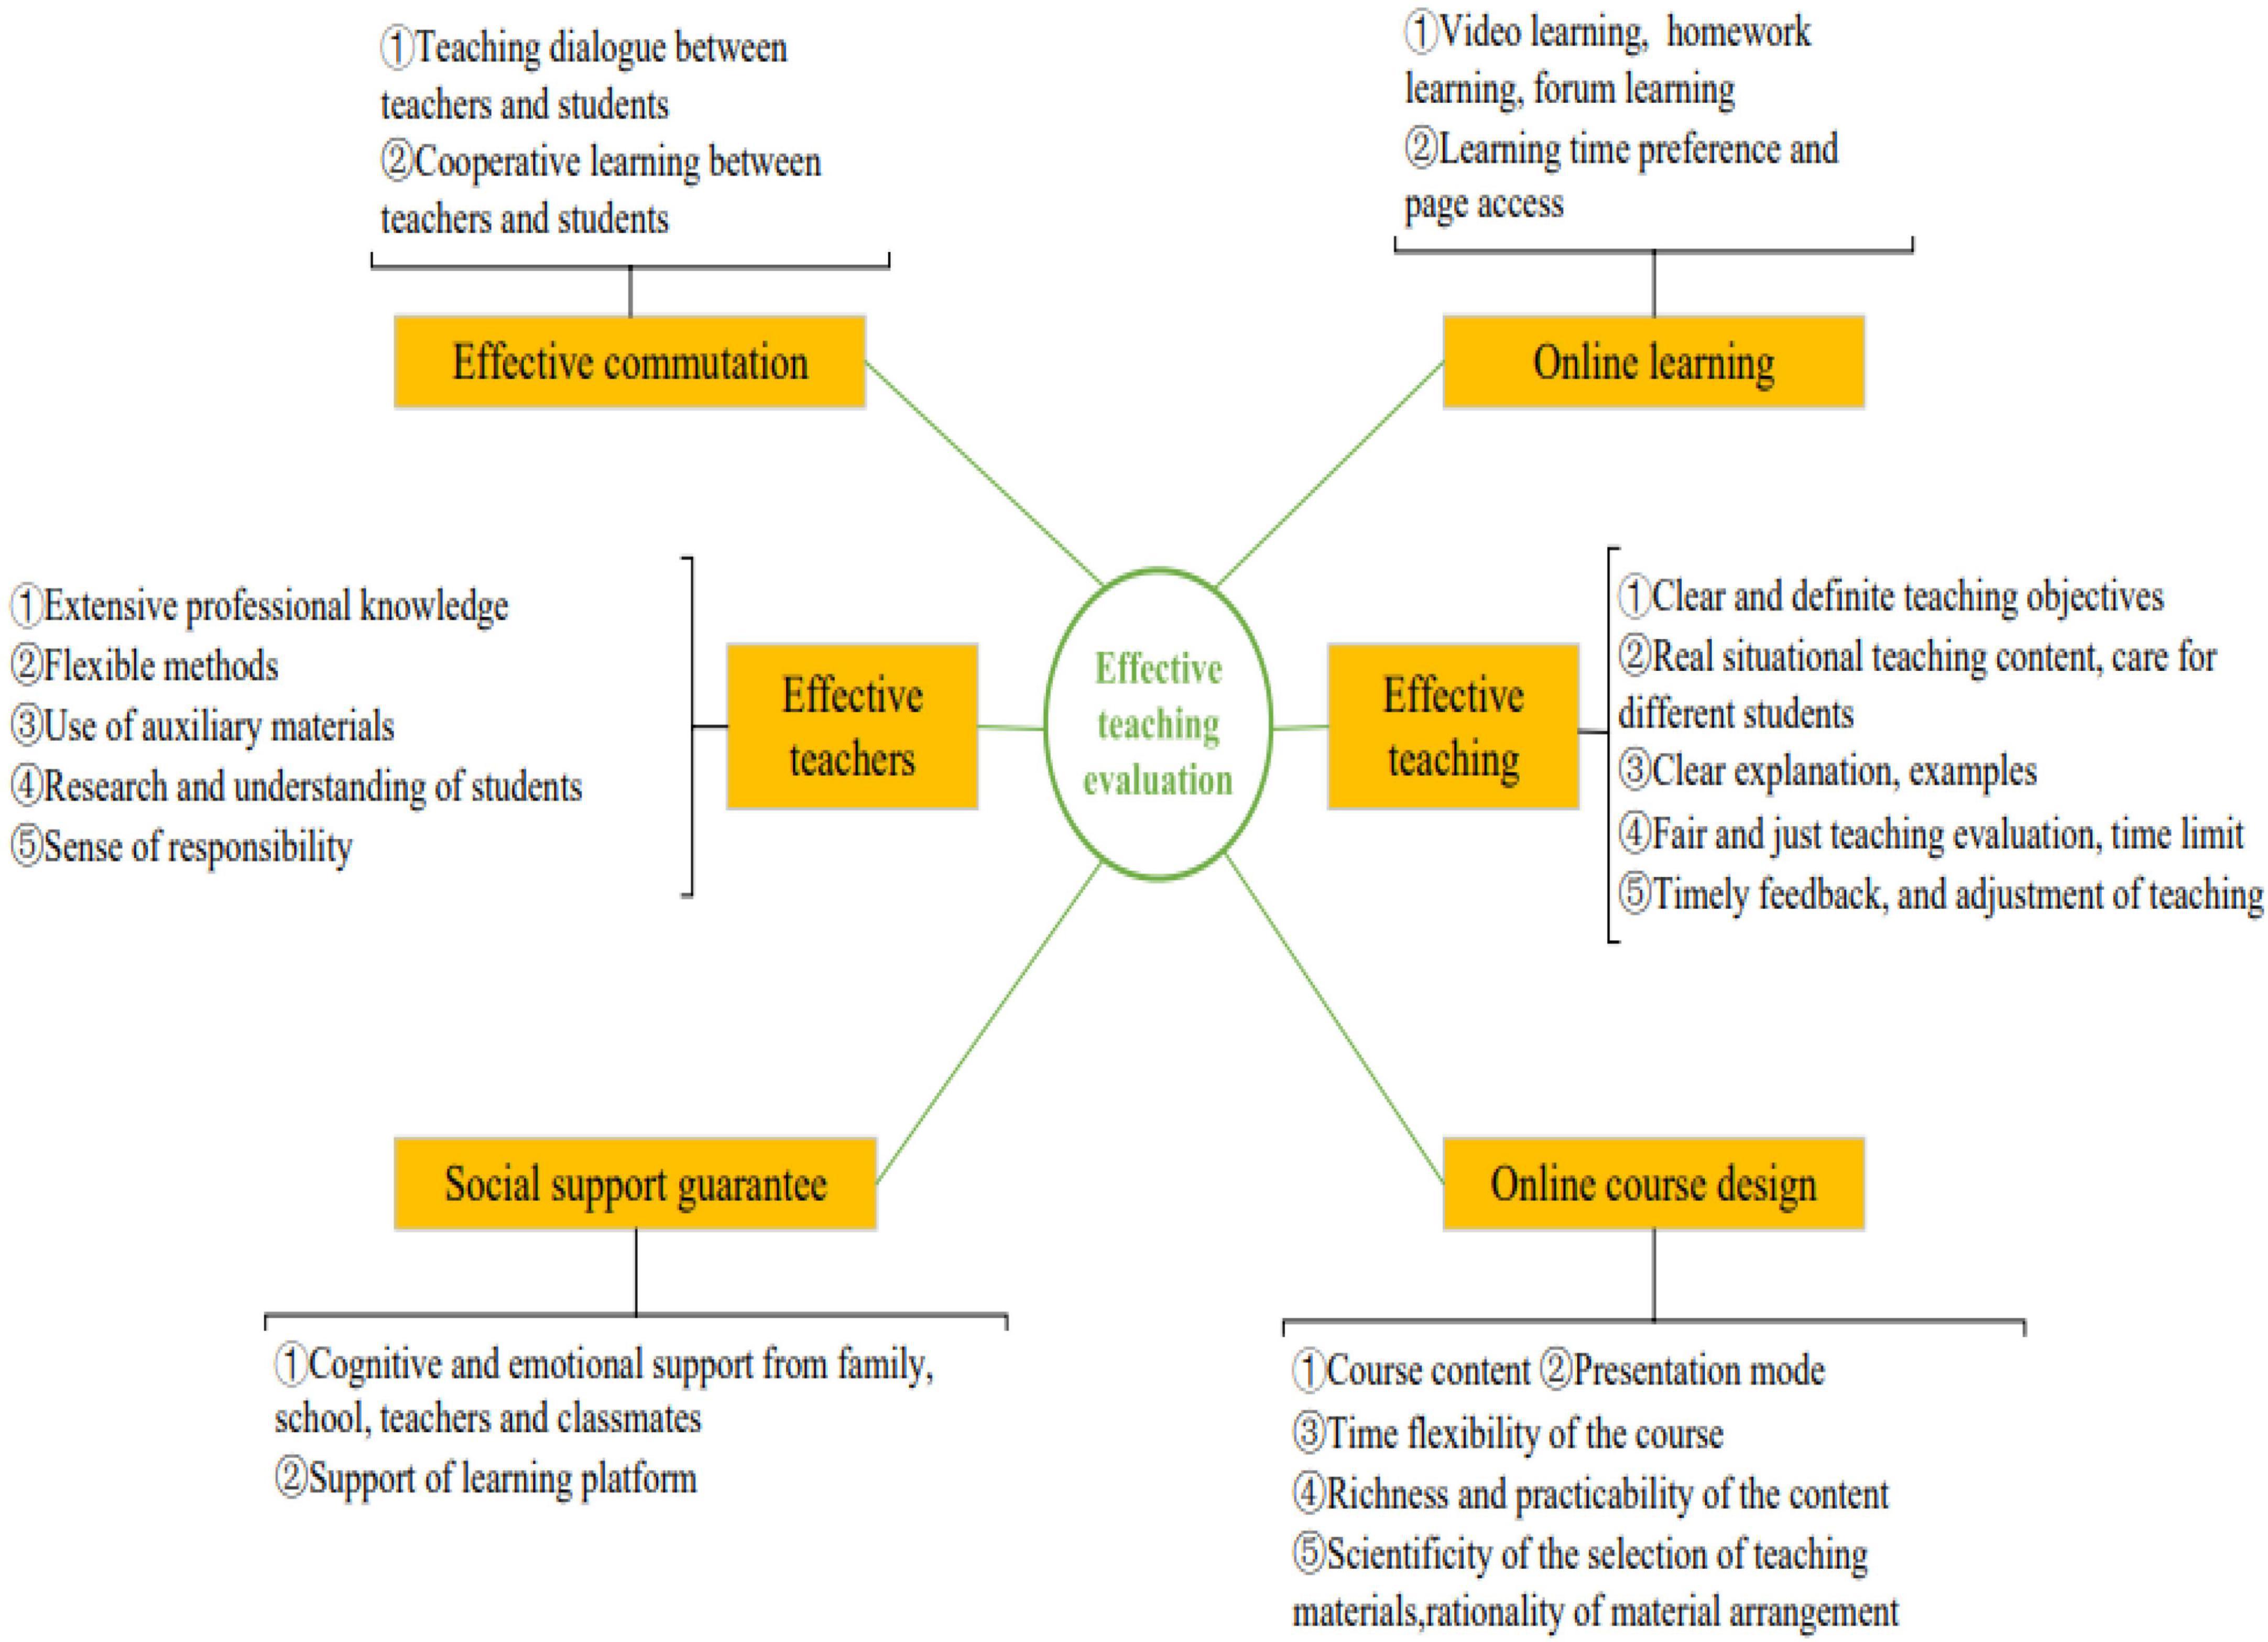 frontiers-influencing-factors-for-effective-teaching-evaluation-of